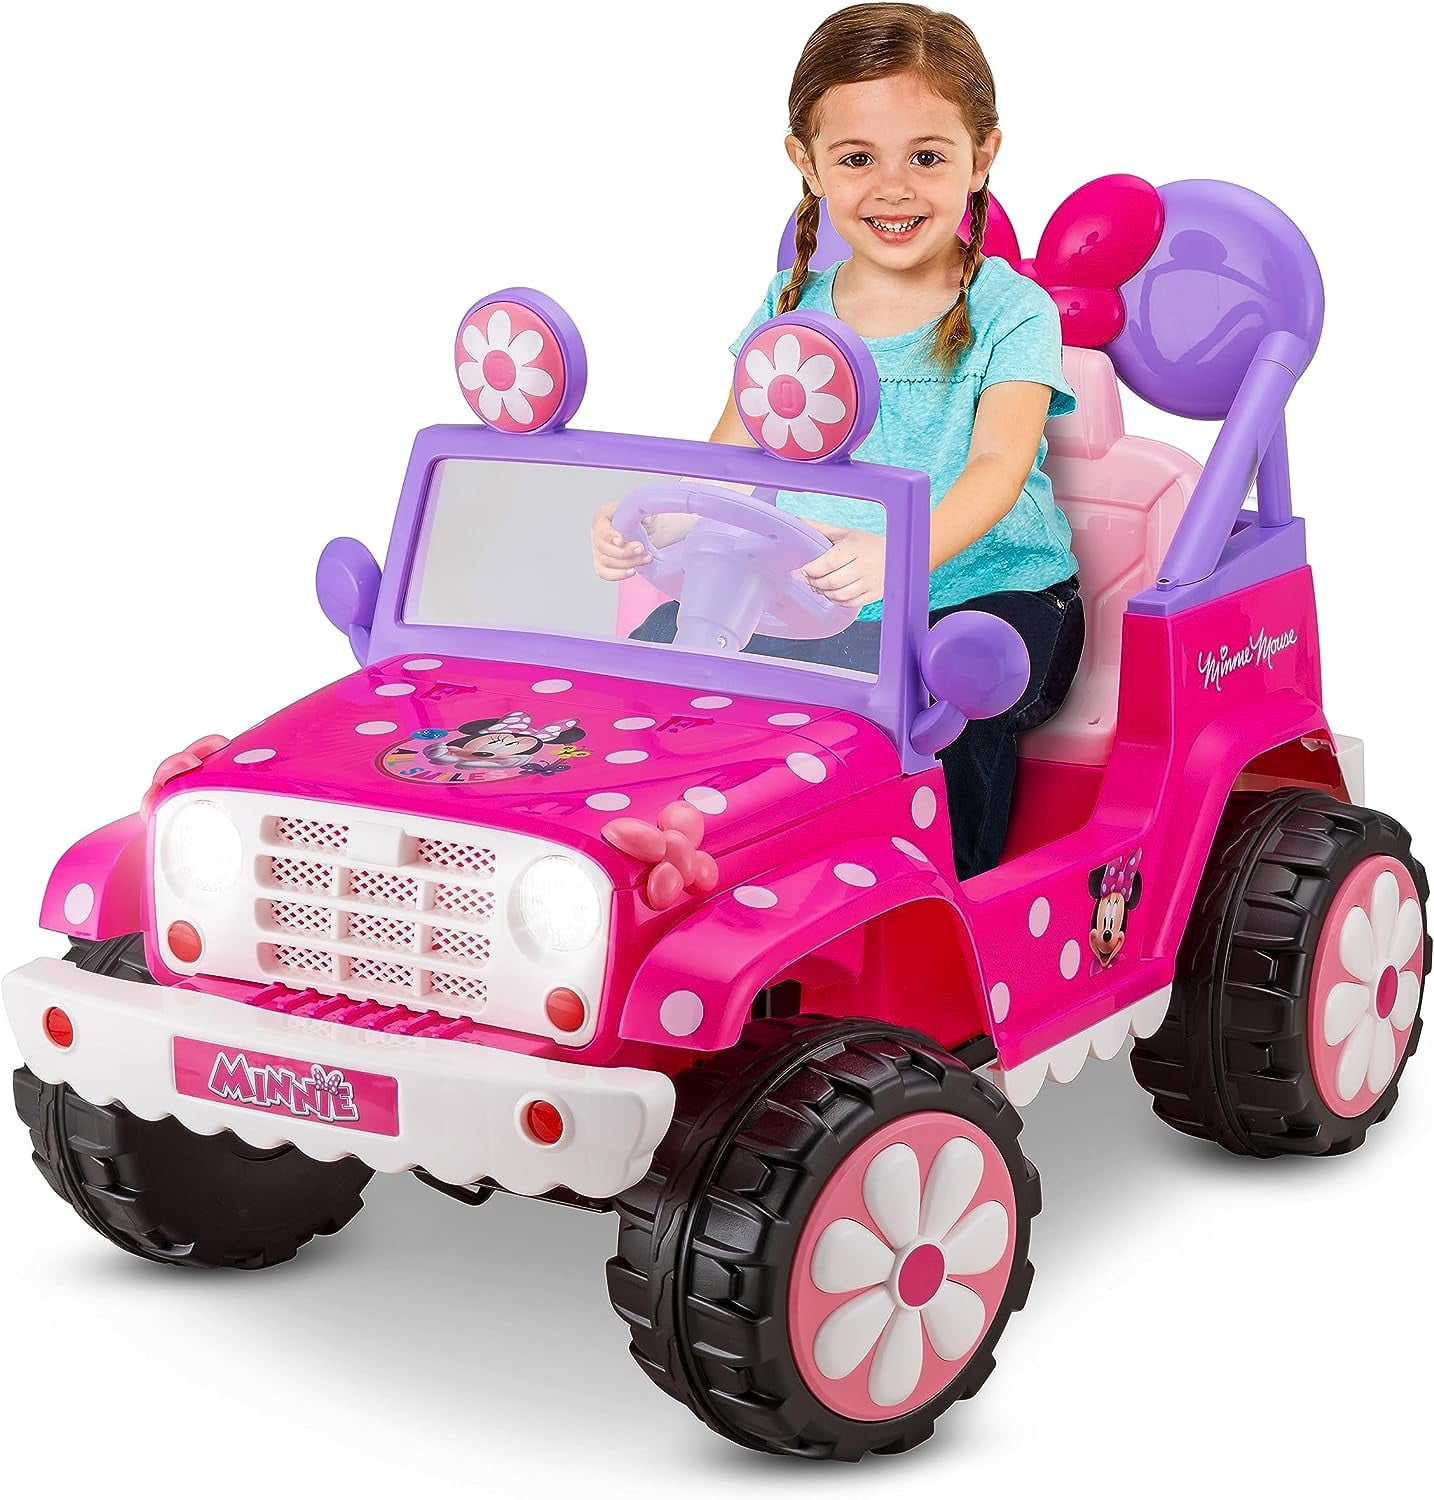 Kid Trax Disney\'s Minnie Mouse 6V Ride-On Toy, Flower Power 4x4 Battery  Powered Outdoor Toy, Kids Ages 3-5 and Up to 60 lbs, Working Headlights,  Sounds, Pink Minnie Mouse Ride On, Toddler,